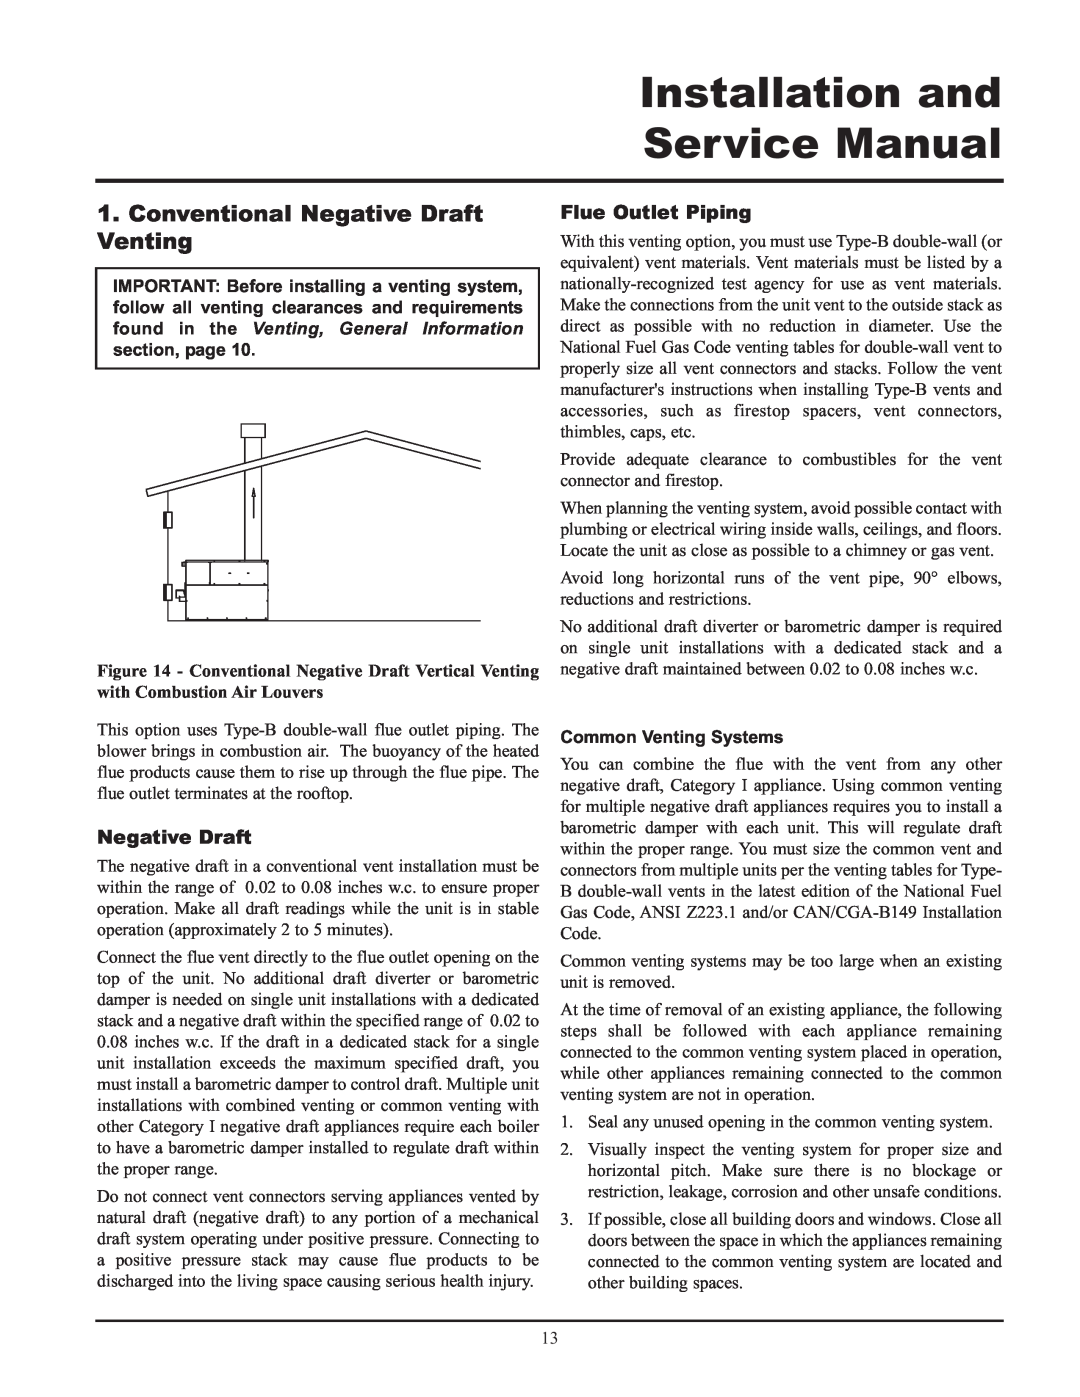 Lochinvar 065, 495, 000 - 2 service manual Conventional Negative Draft Venting, Flue Outlet Piping 